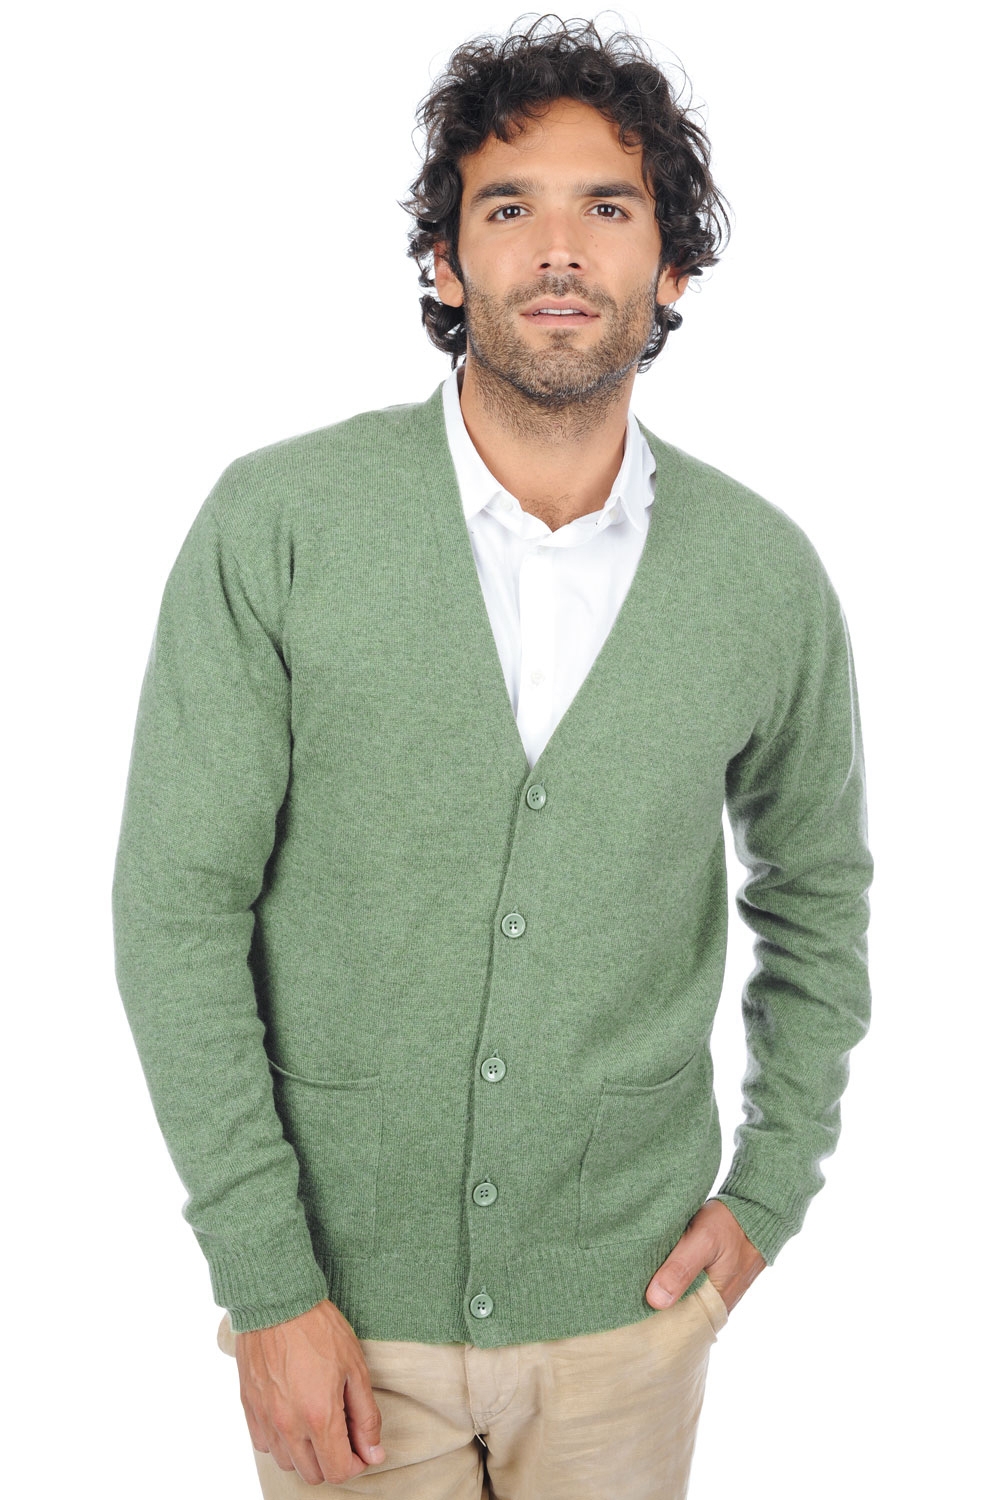 Cachemire pull homme yoni vert chine 2xl